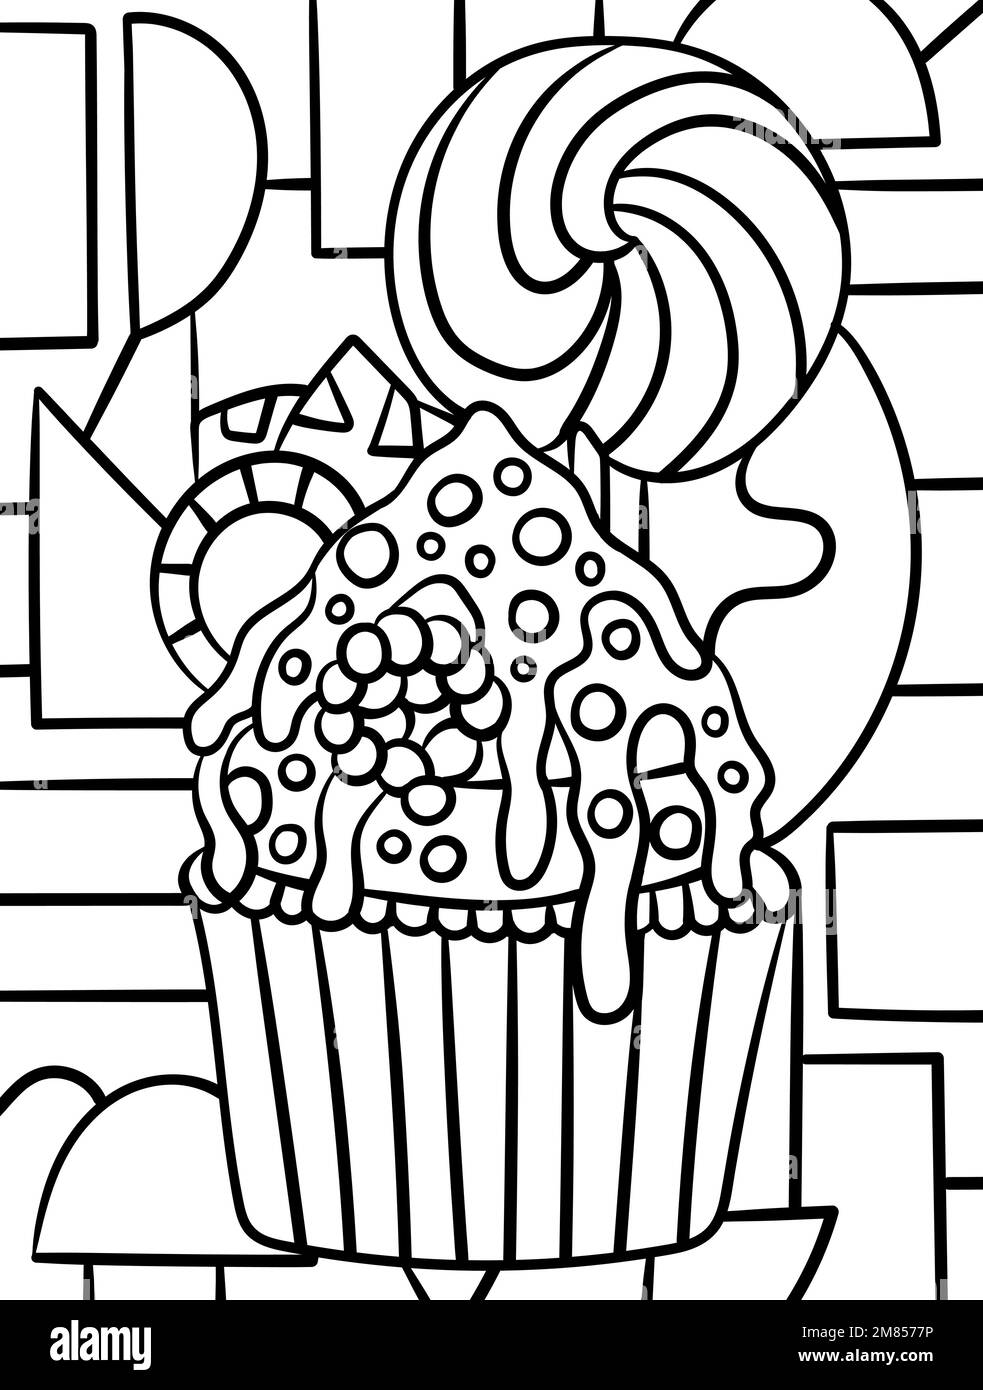 Muffin With Candy Sweet Food Coloring Page  Stock Vector